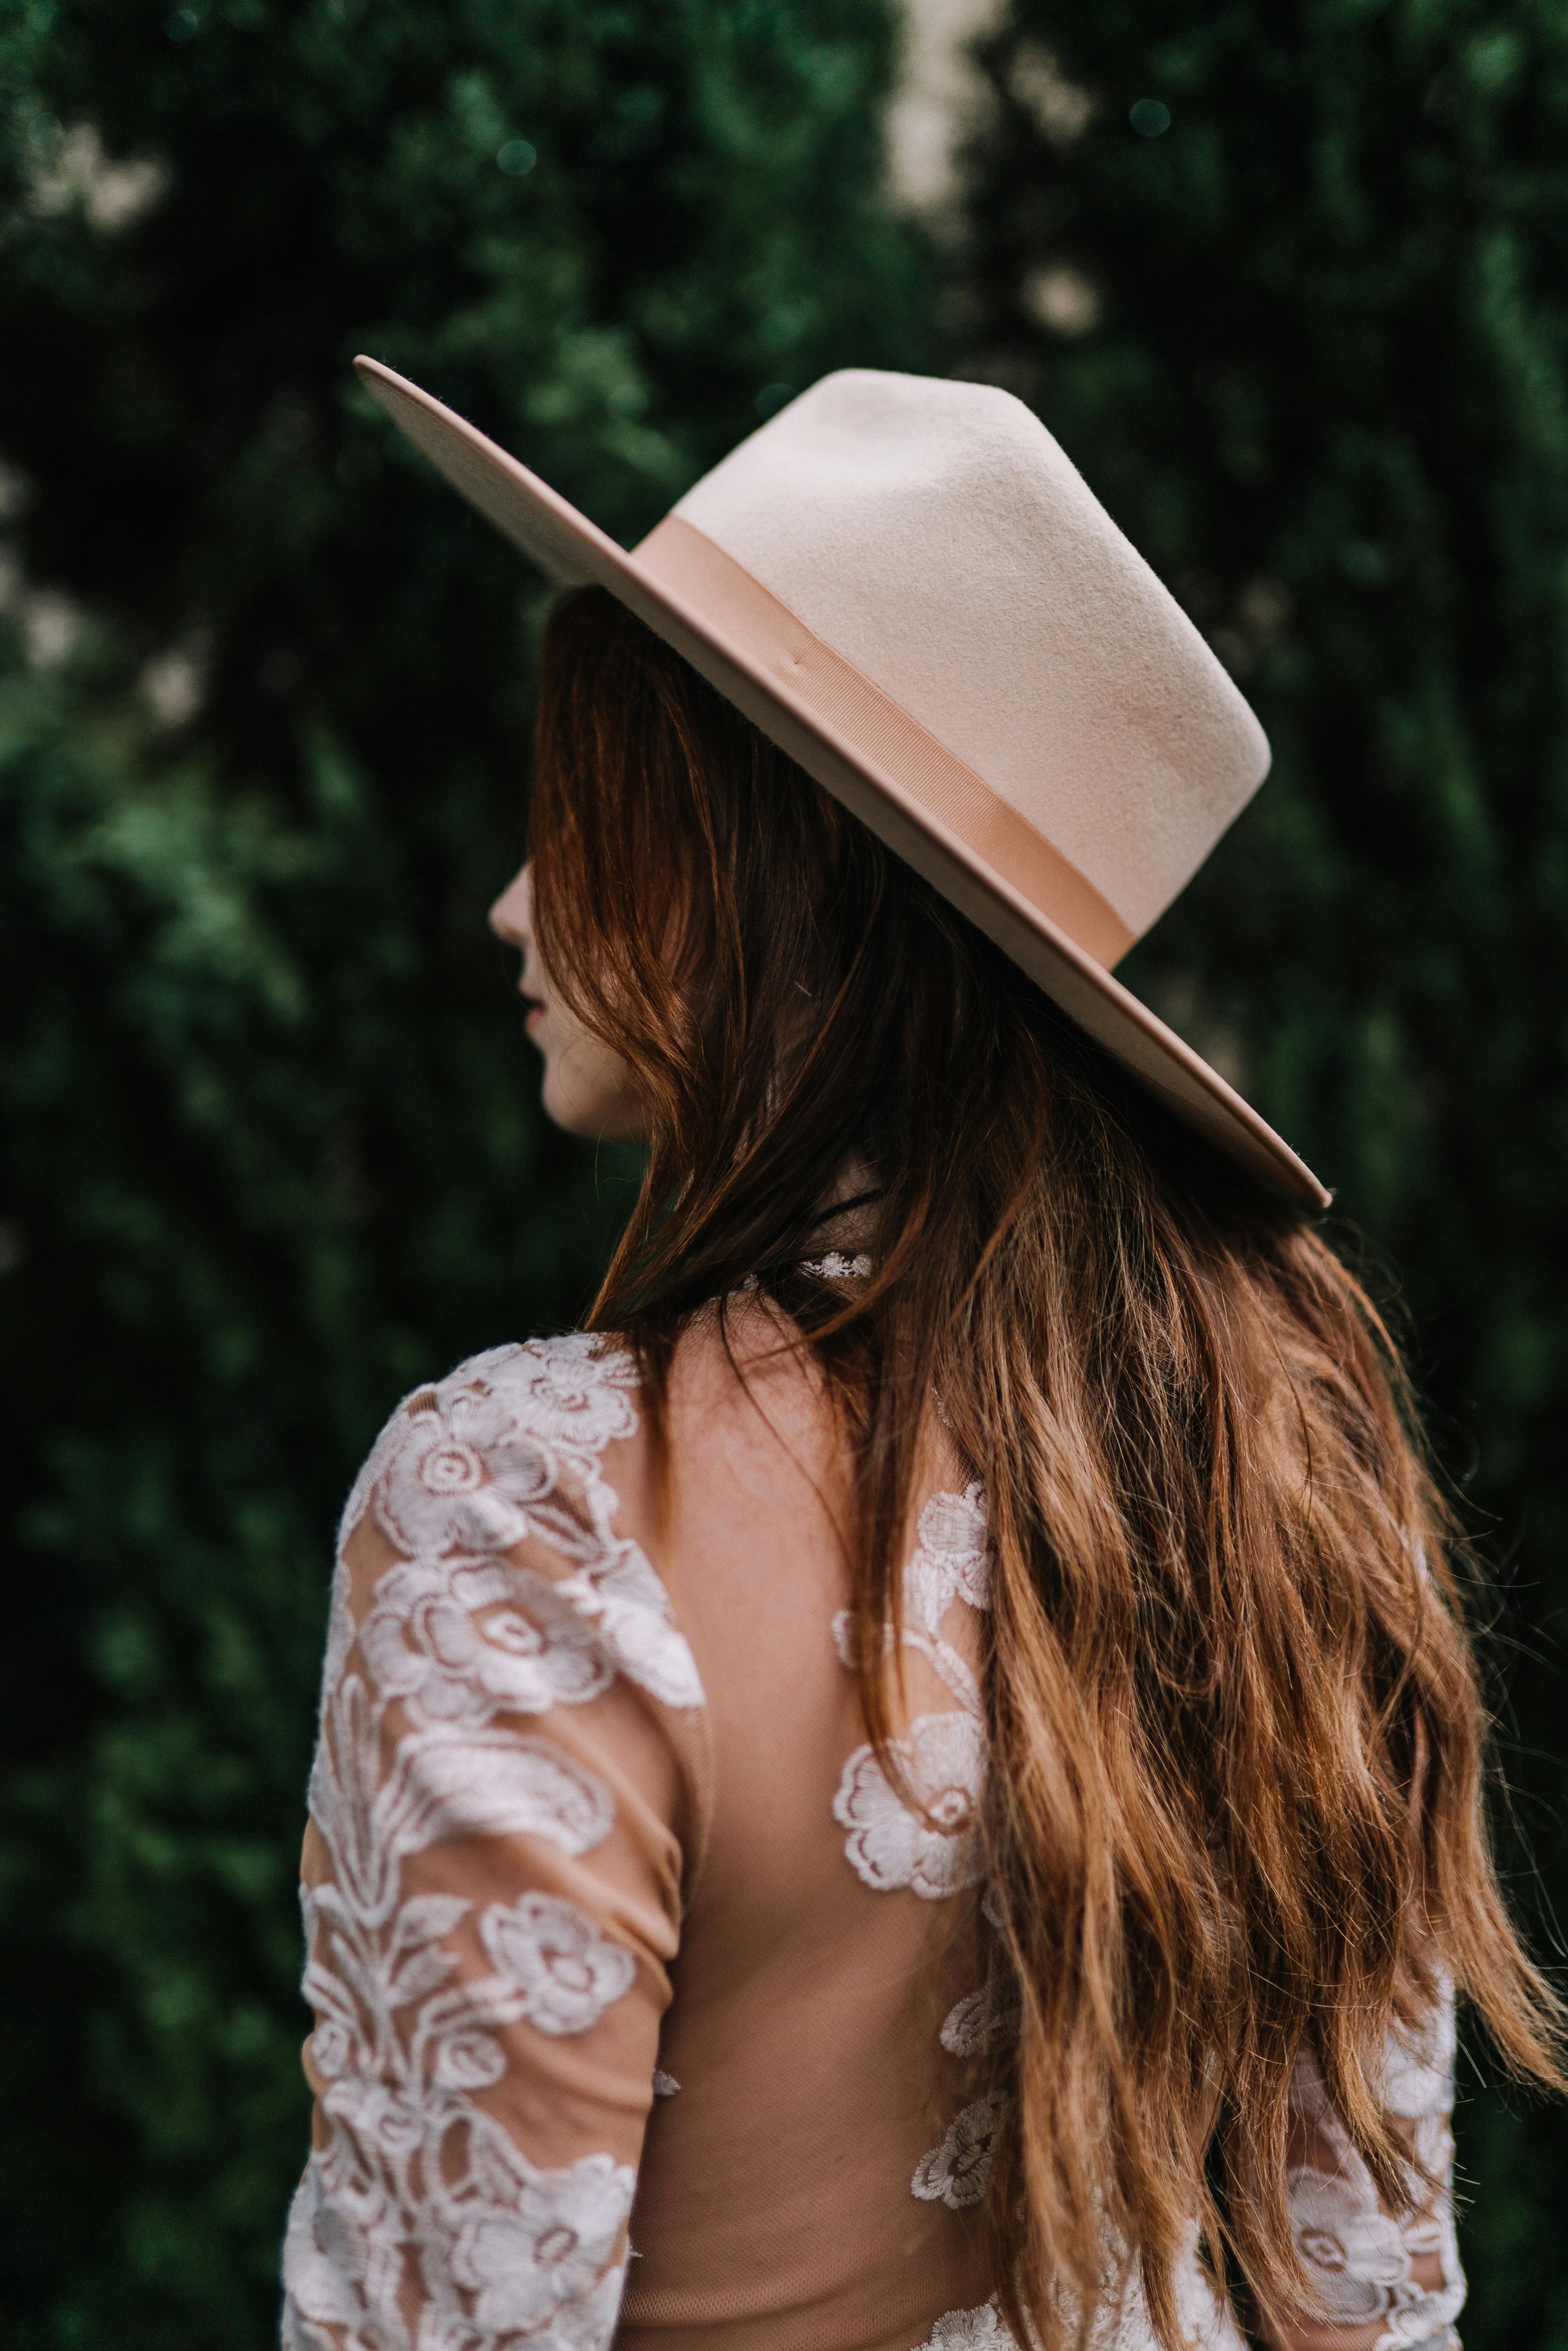 A Woman in Floral Top Wearing a Wide Brim Hat · Free Stock Photo